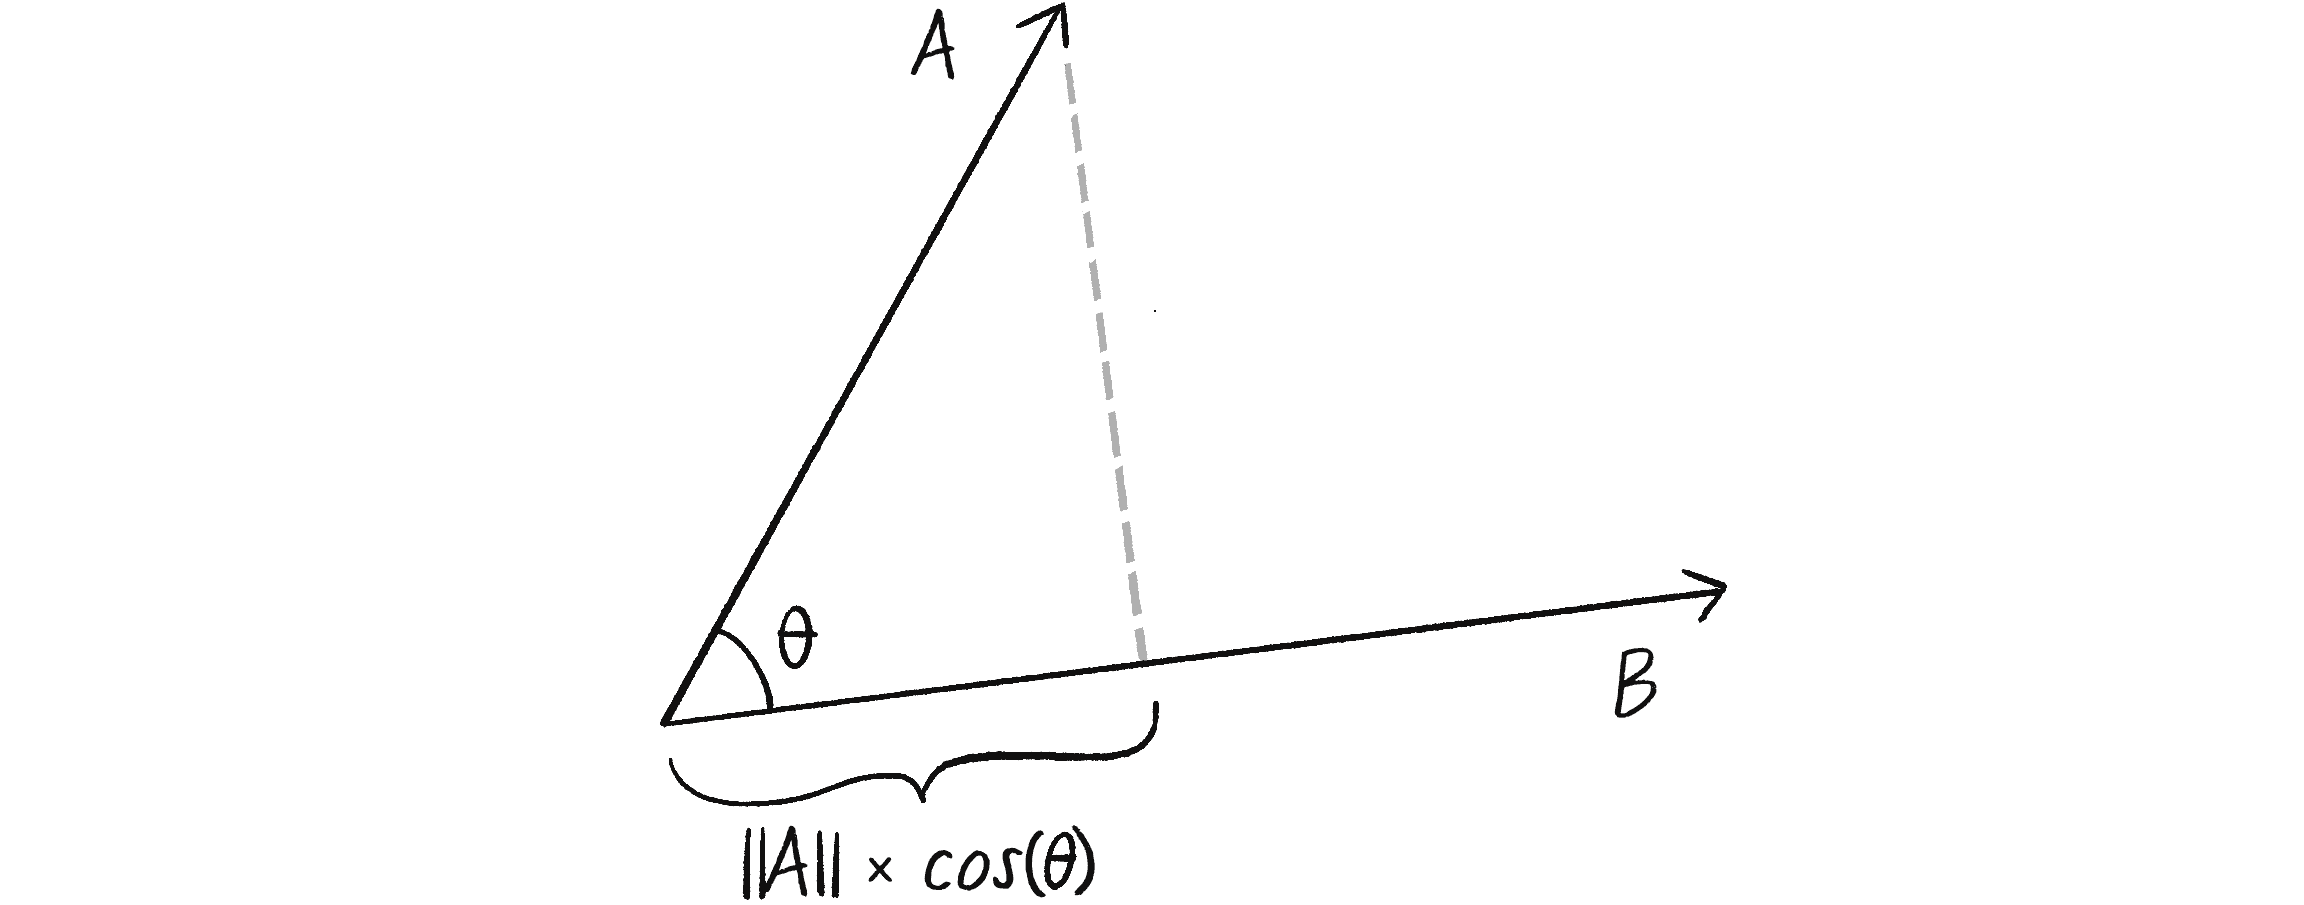 Figure 5.25: The scalar projection of \vec{A} onto \vec{B} is equal to ||\vec{A}||\times\cos(\theta).